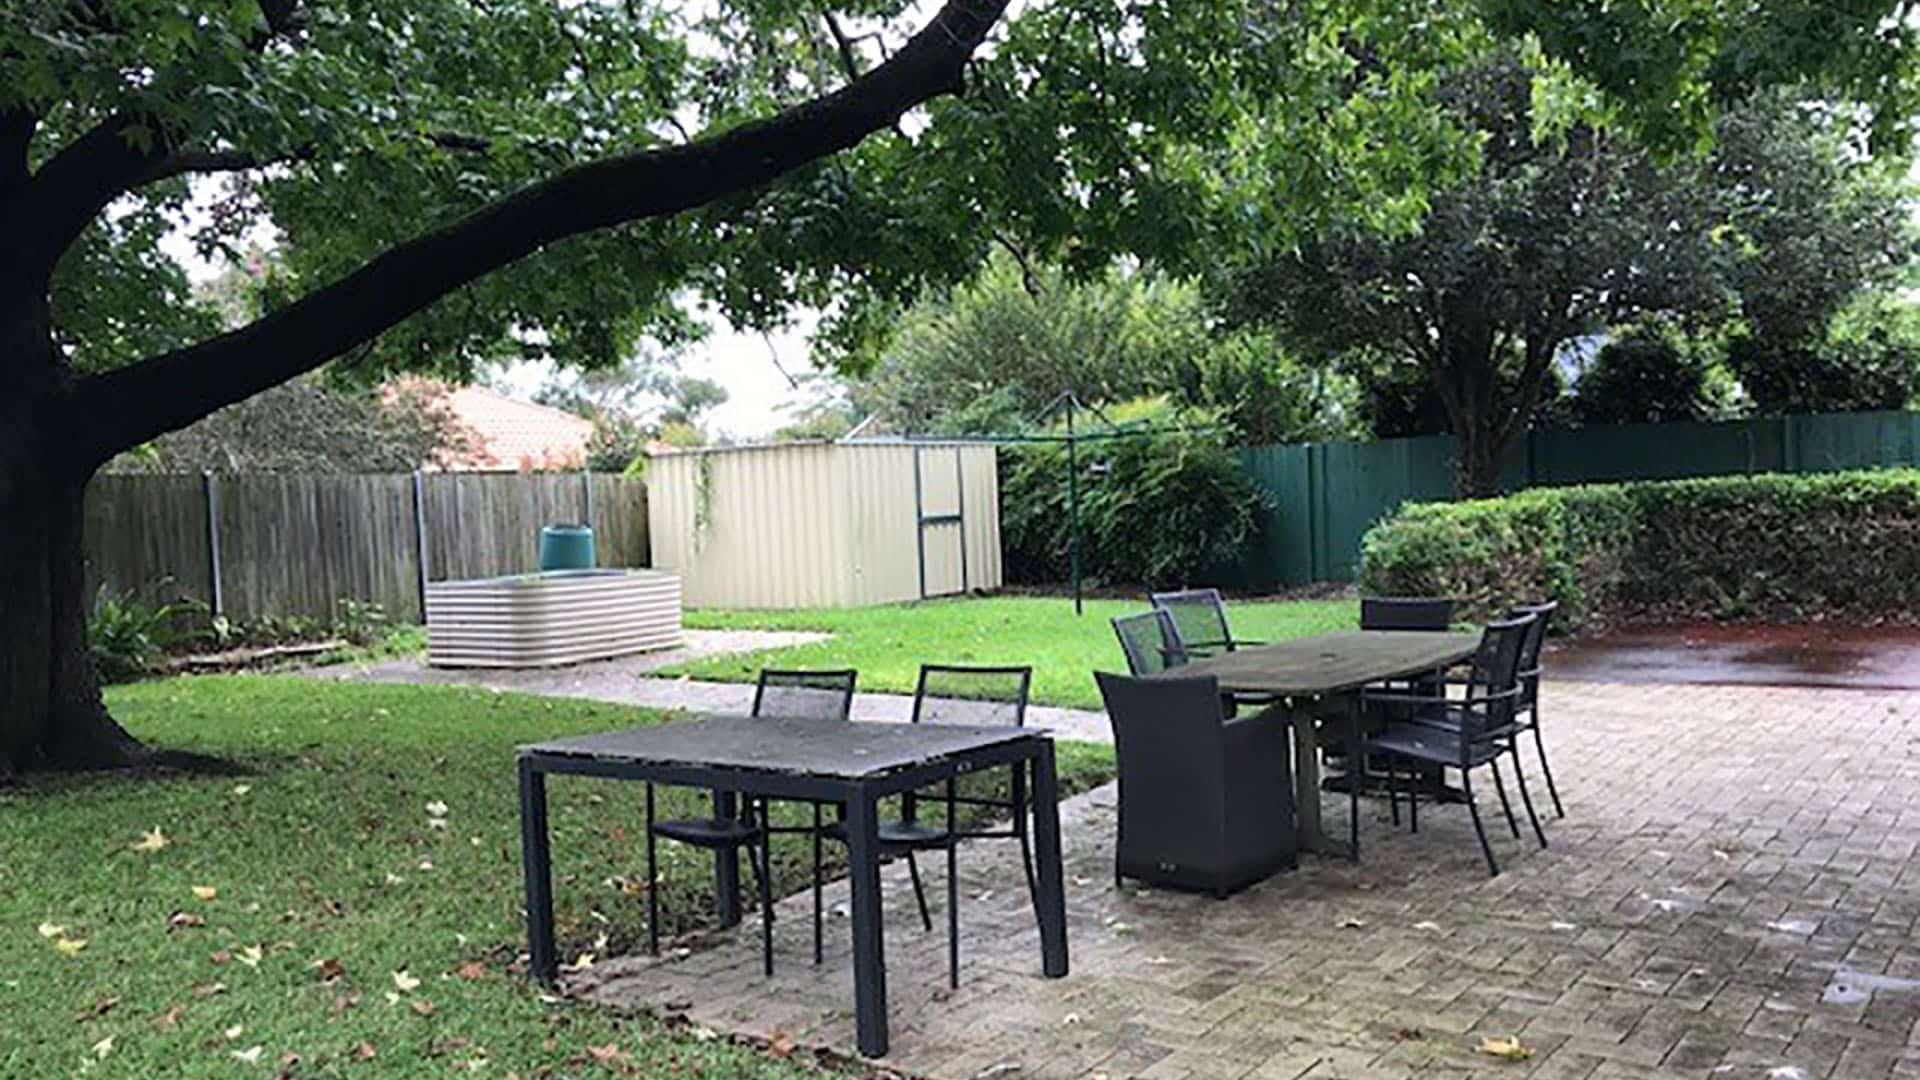 Grassed backyard with large tree, shed and garden beds.